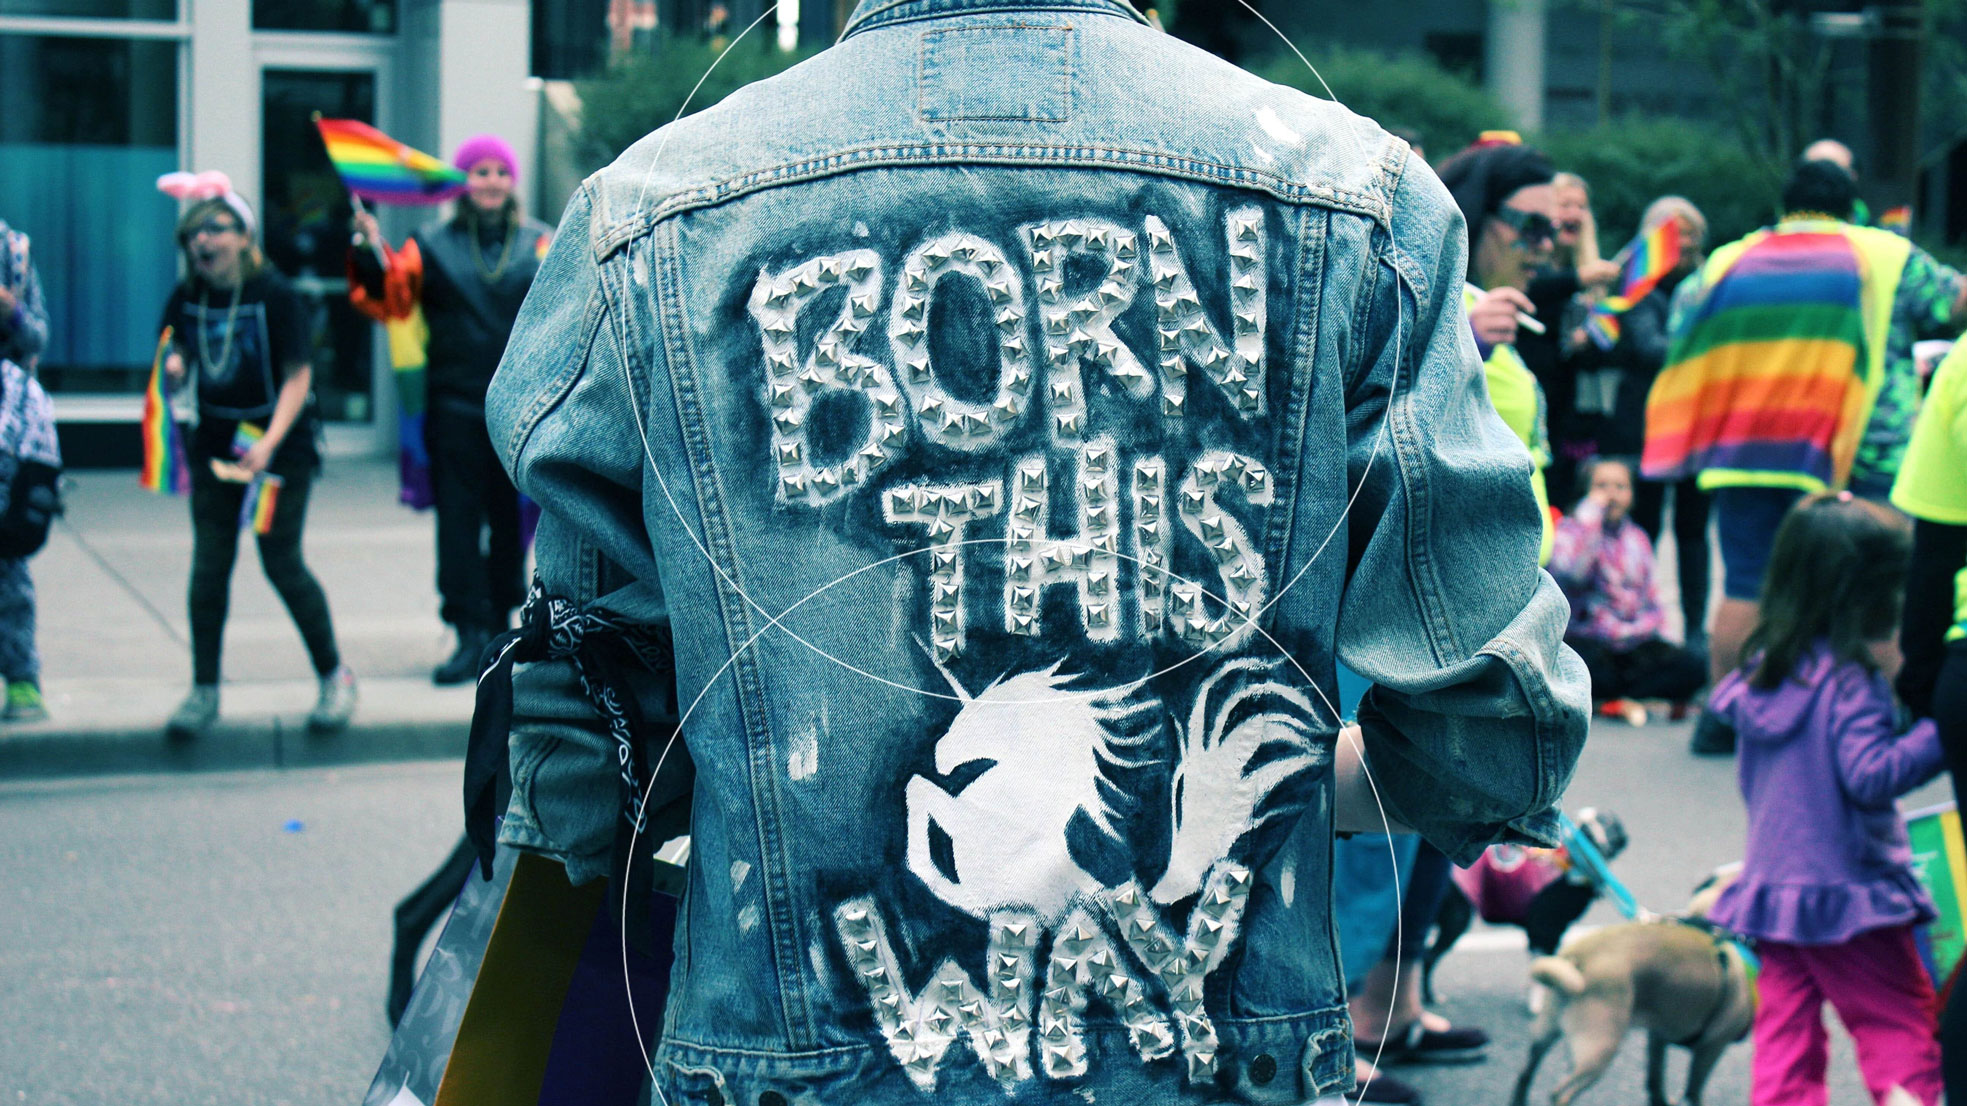 jean jacket at a gay pride event with the words "born this way"